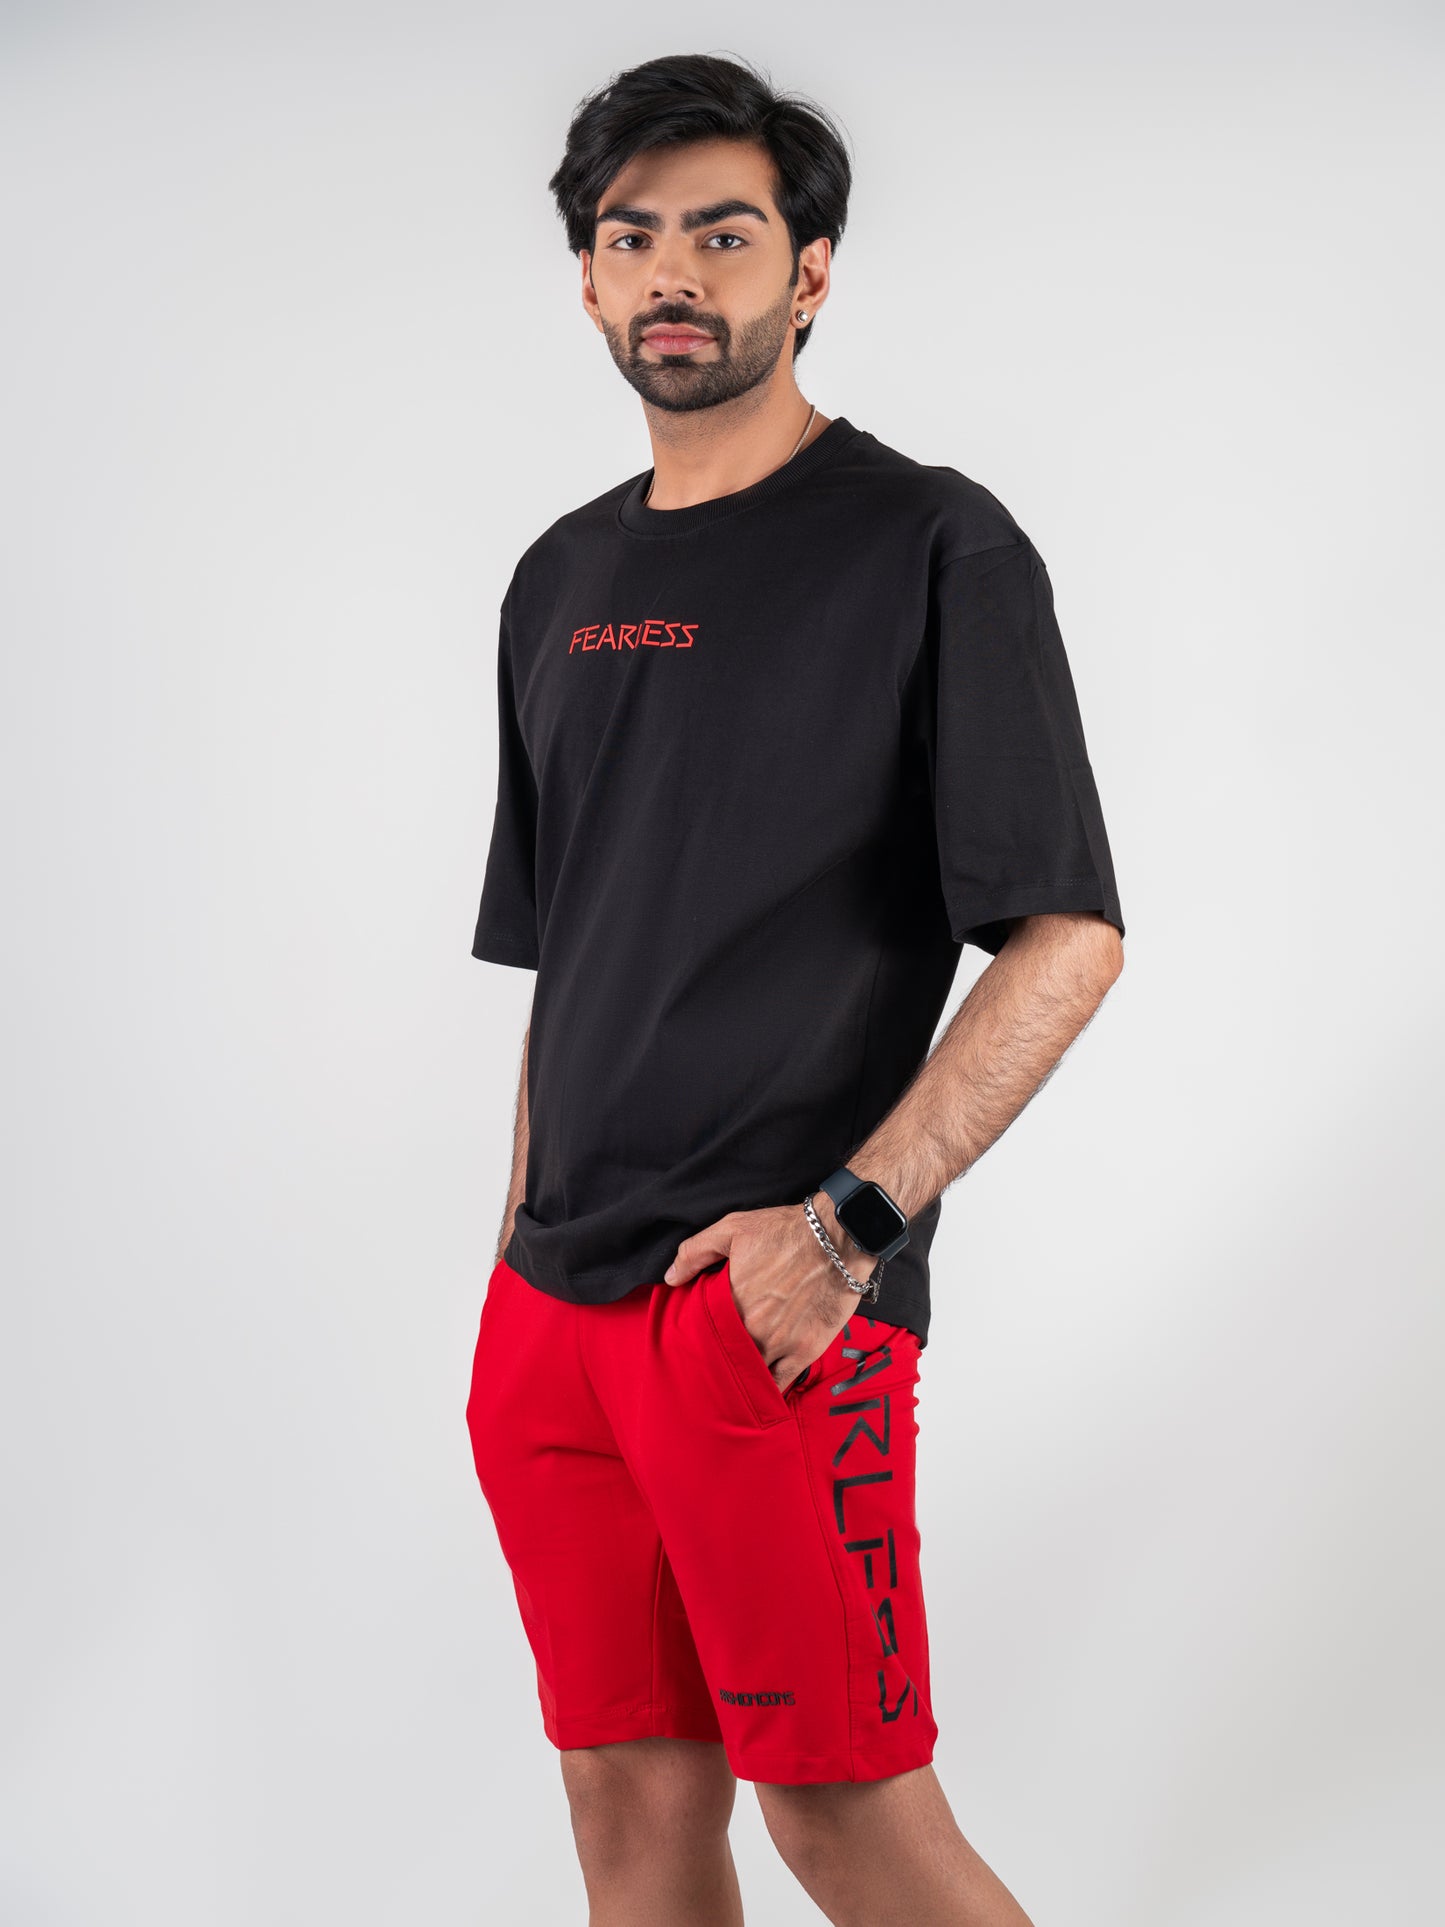 Classic Black T-shirt & Red Shorts Co-Ords Set for Men